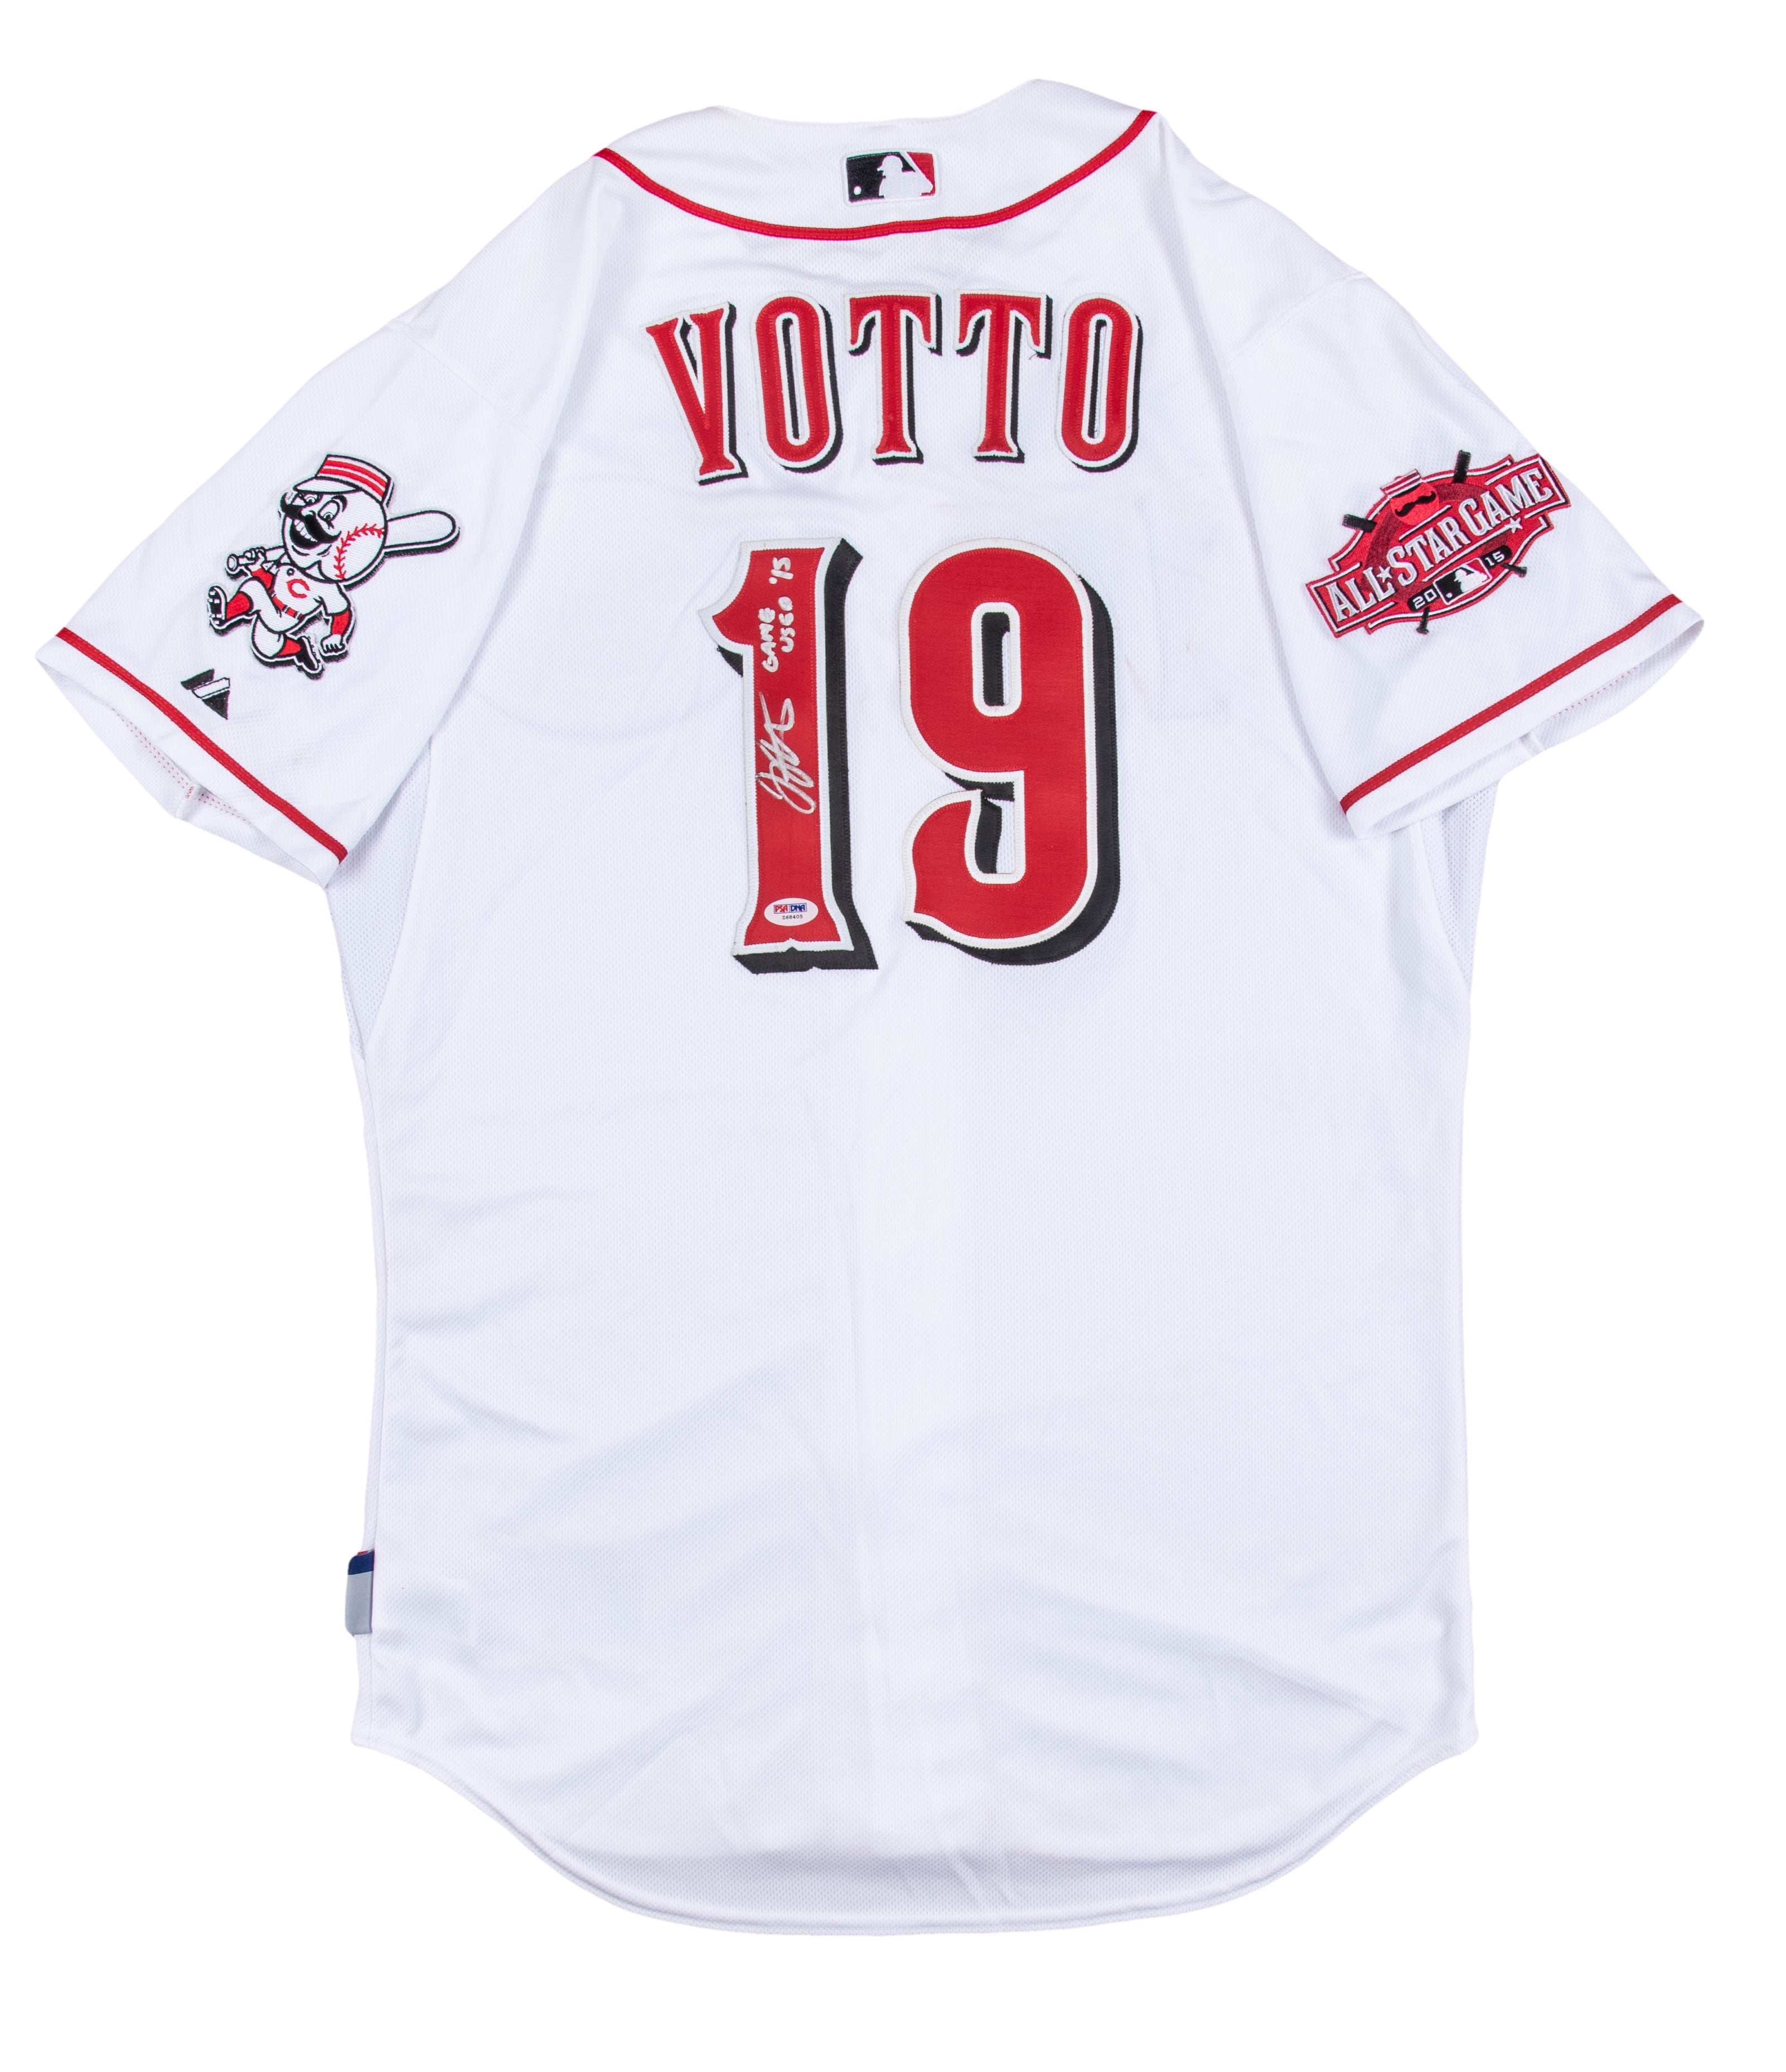 2019 Mexico Series Game Used Jersey - Joey Votto Size 44